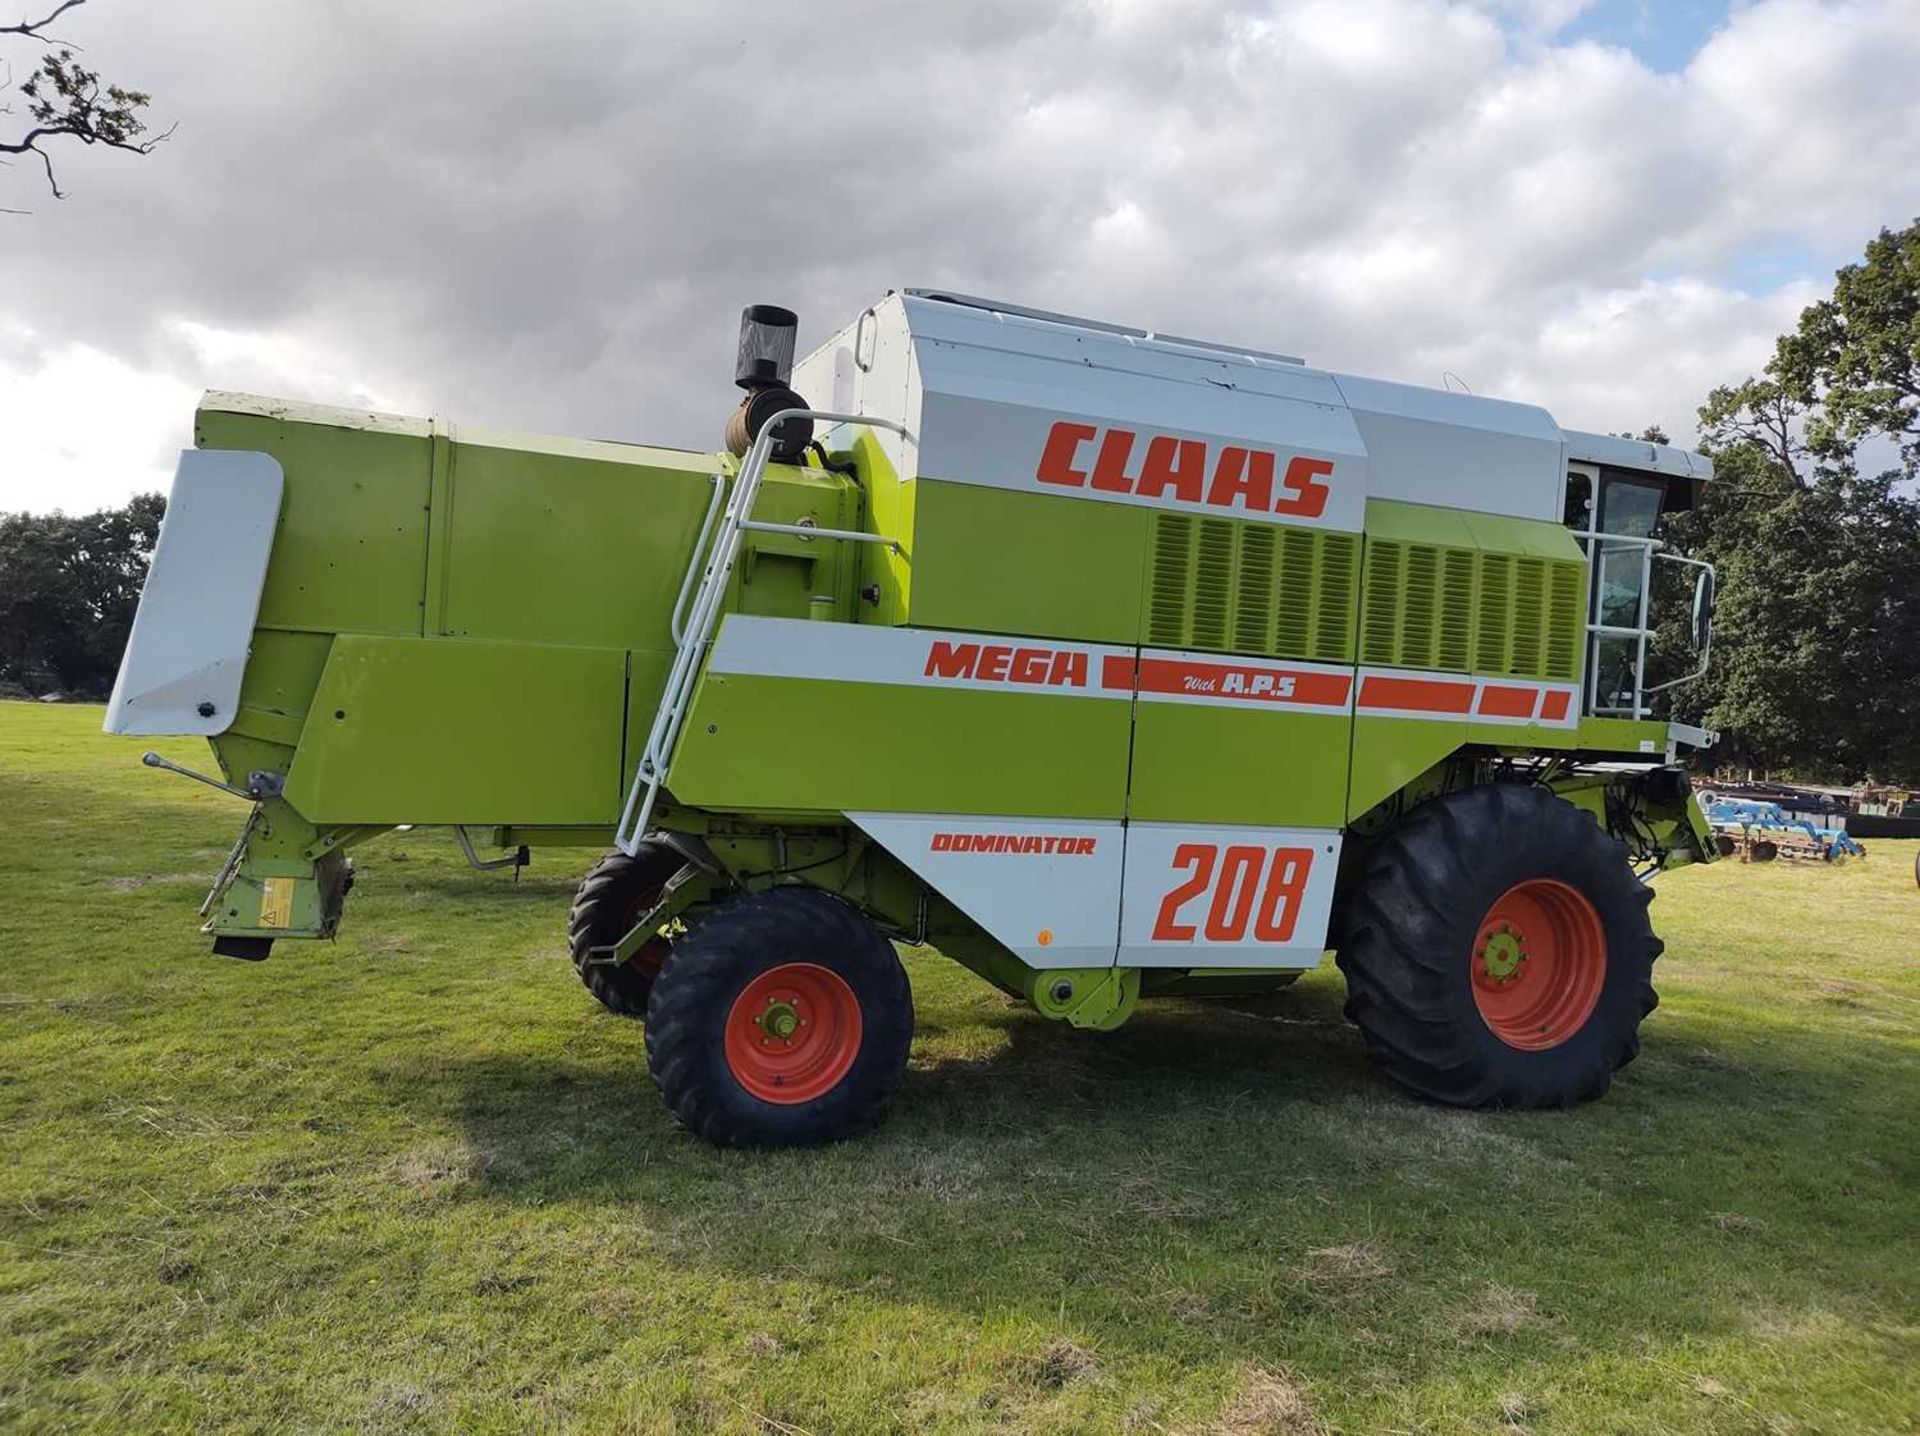 1995 Claas Mega 208 Combine Harvester with 6m Contour Header 3,482 Hrs - Image 3 of 10